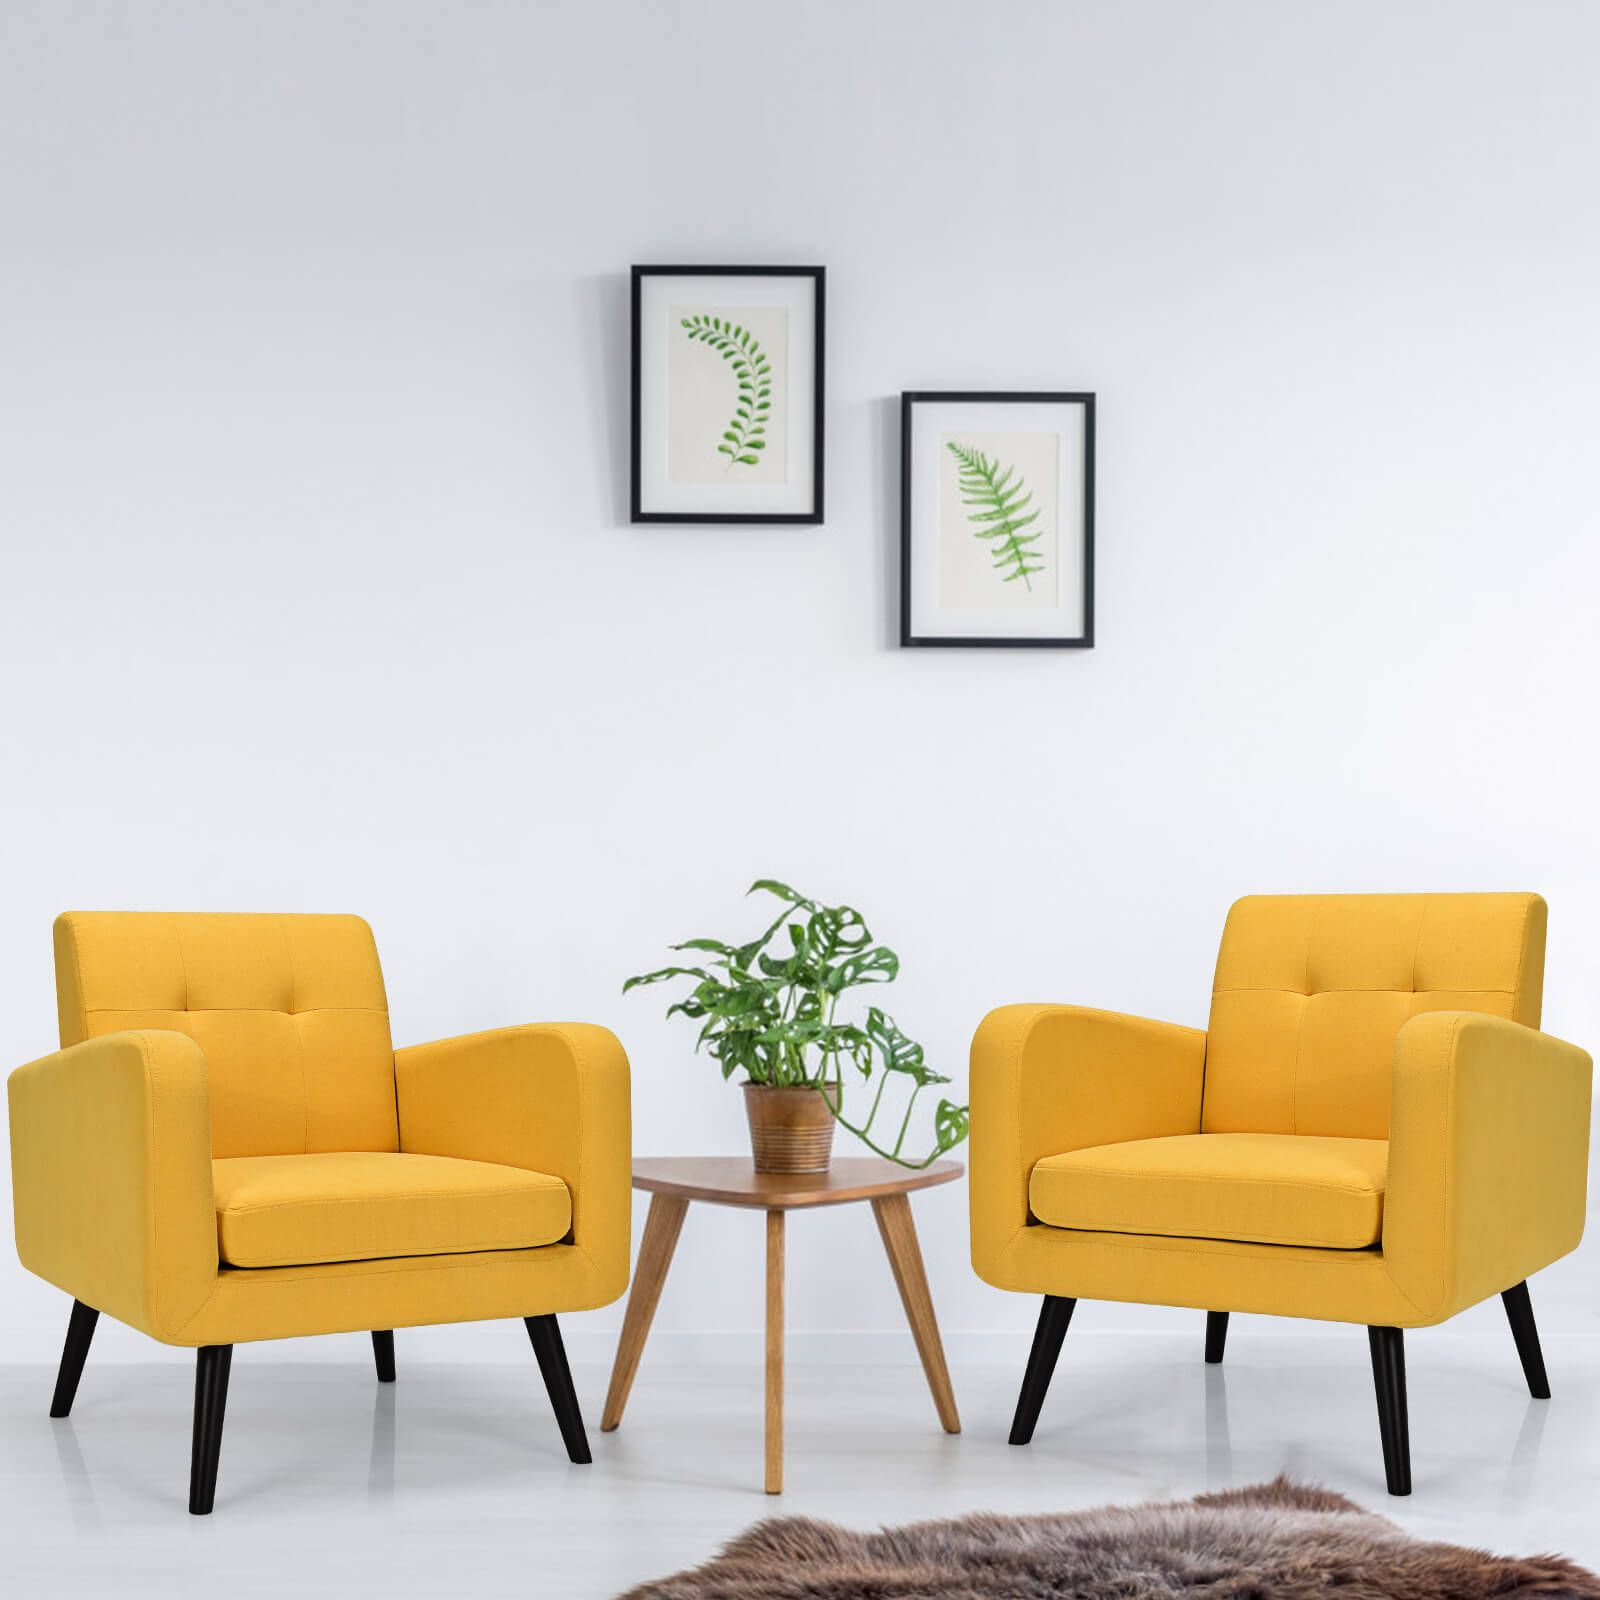 Mid-Century Modern Upholstered Accent Chair with Rubber Wood Legs - Yellow